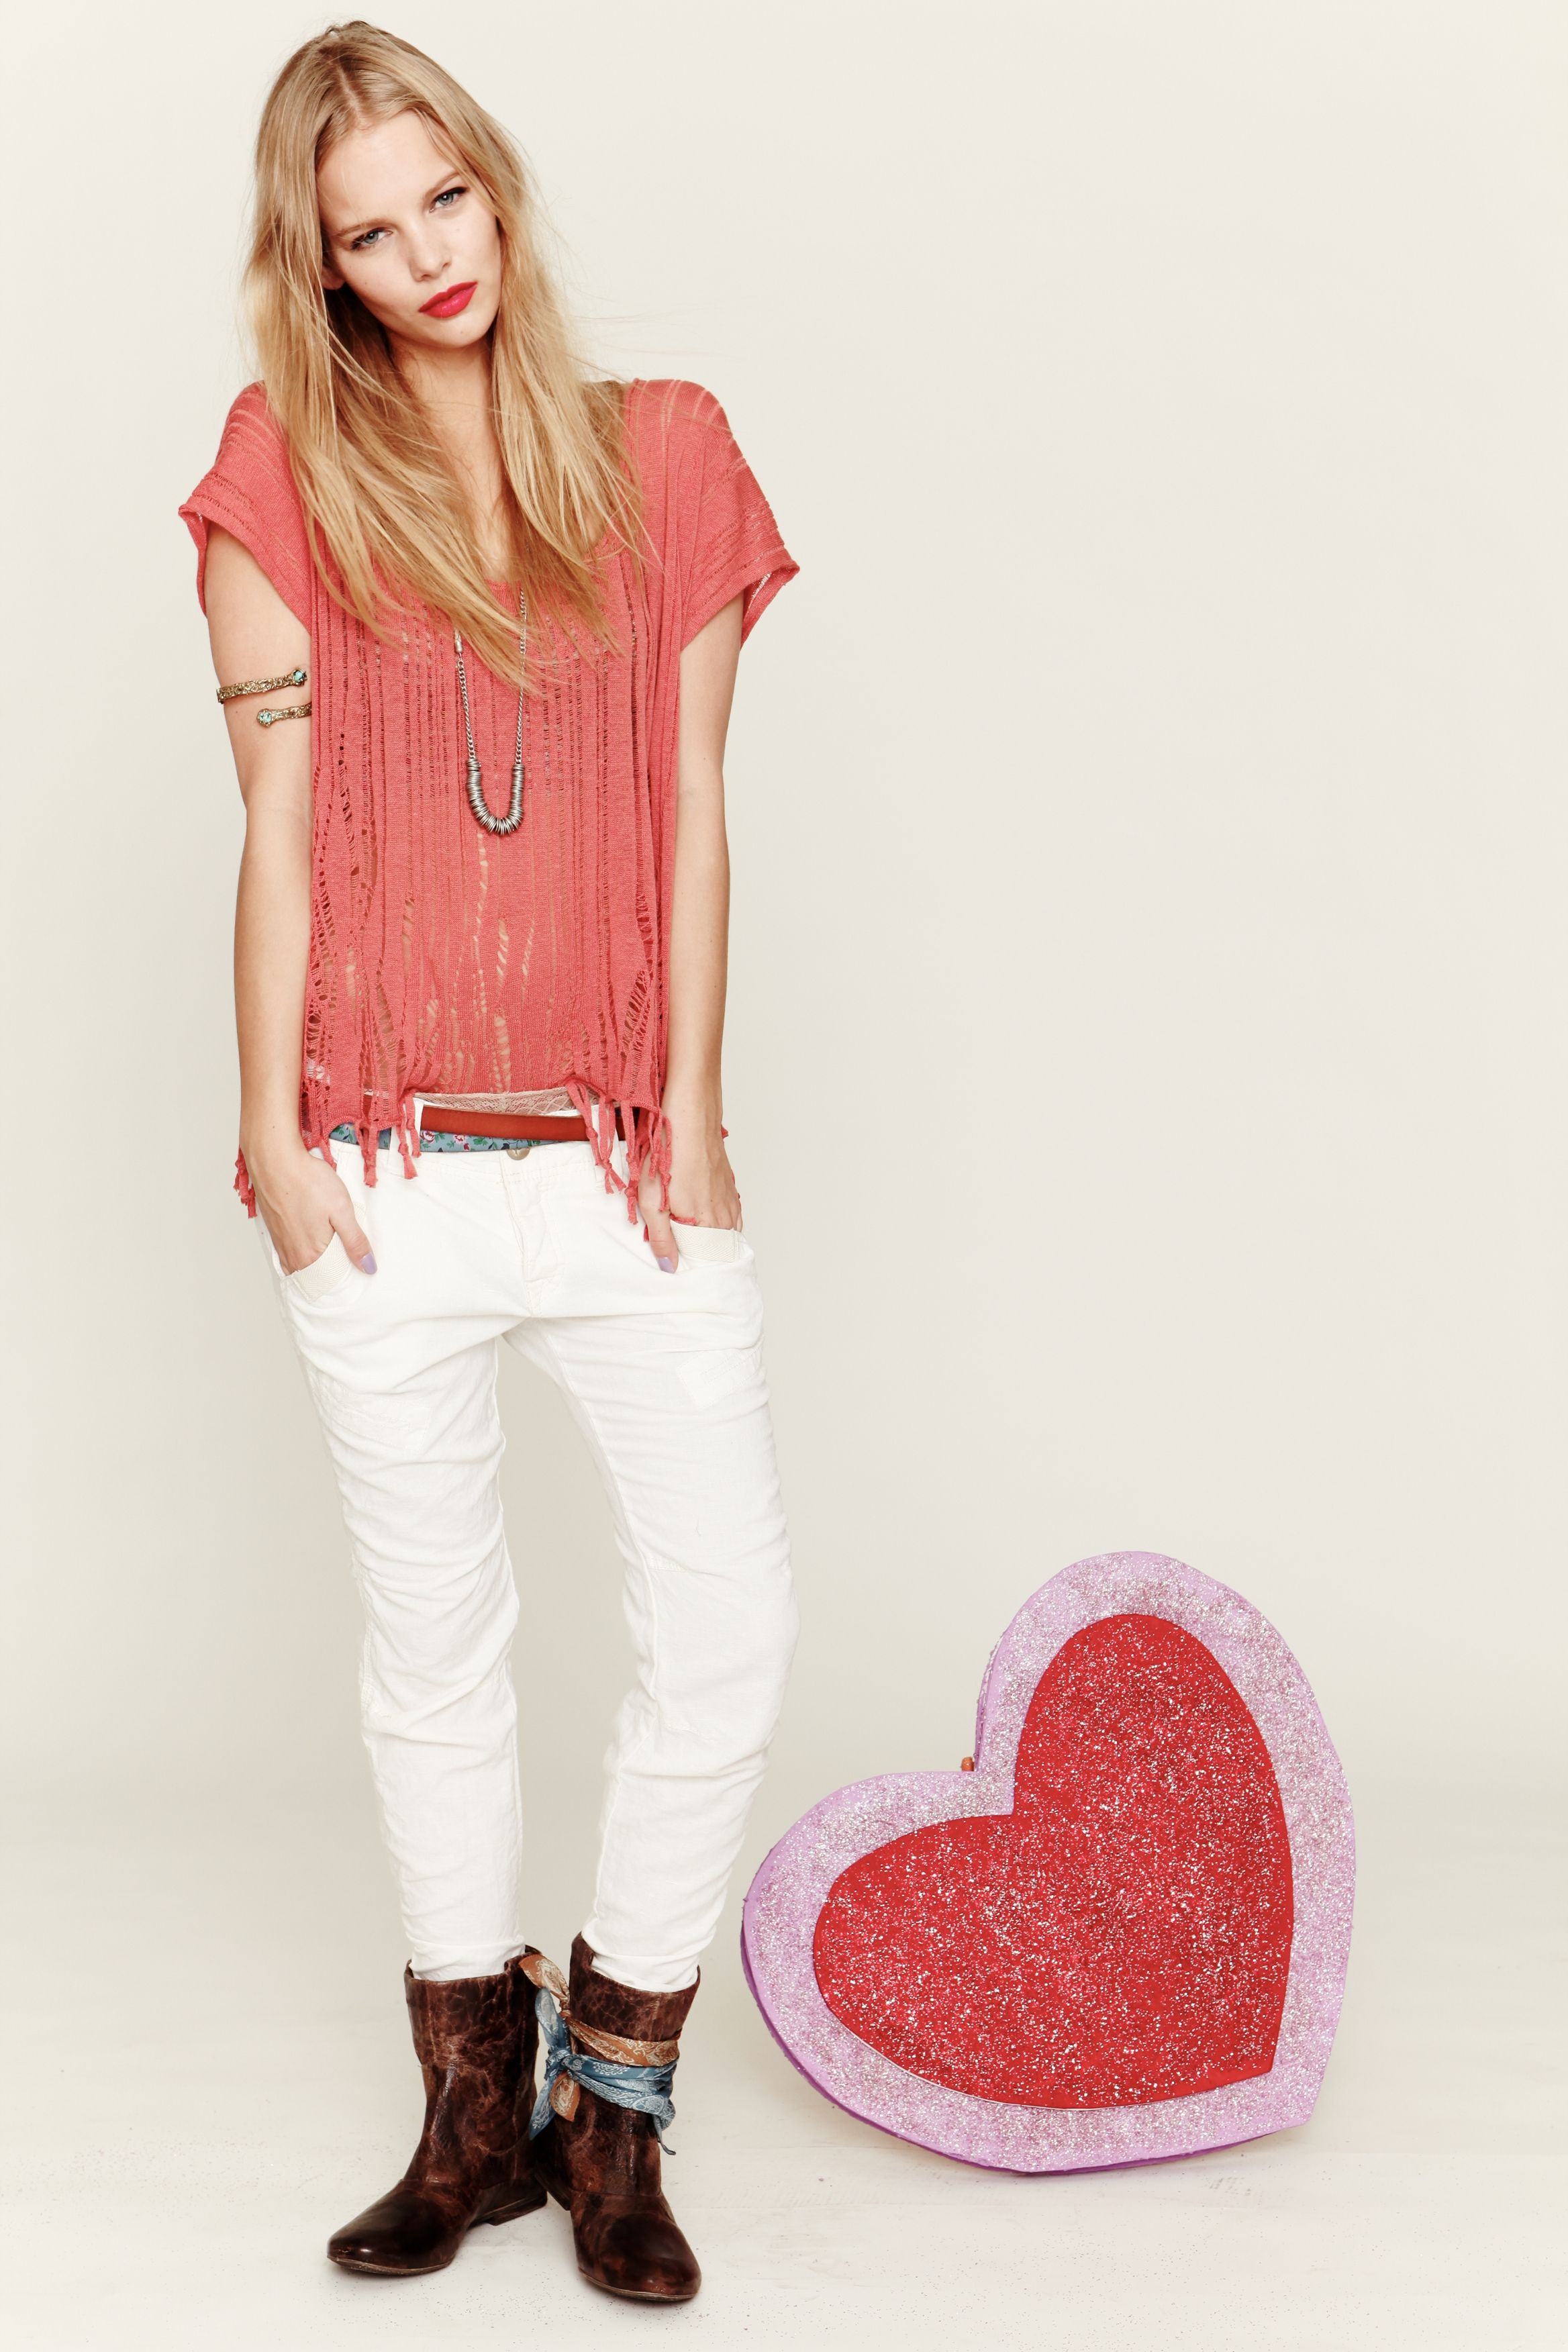 Free People February 2011 Look Book 6